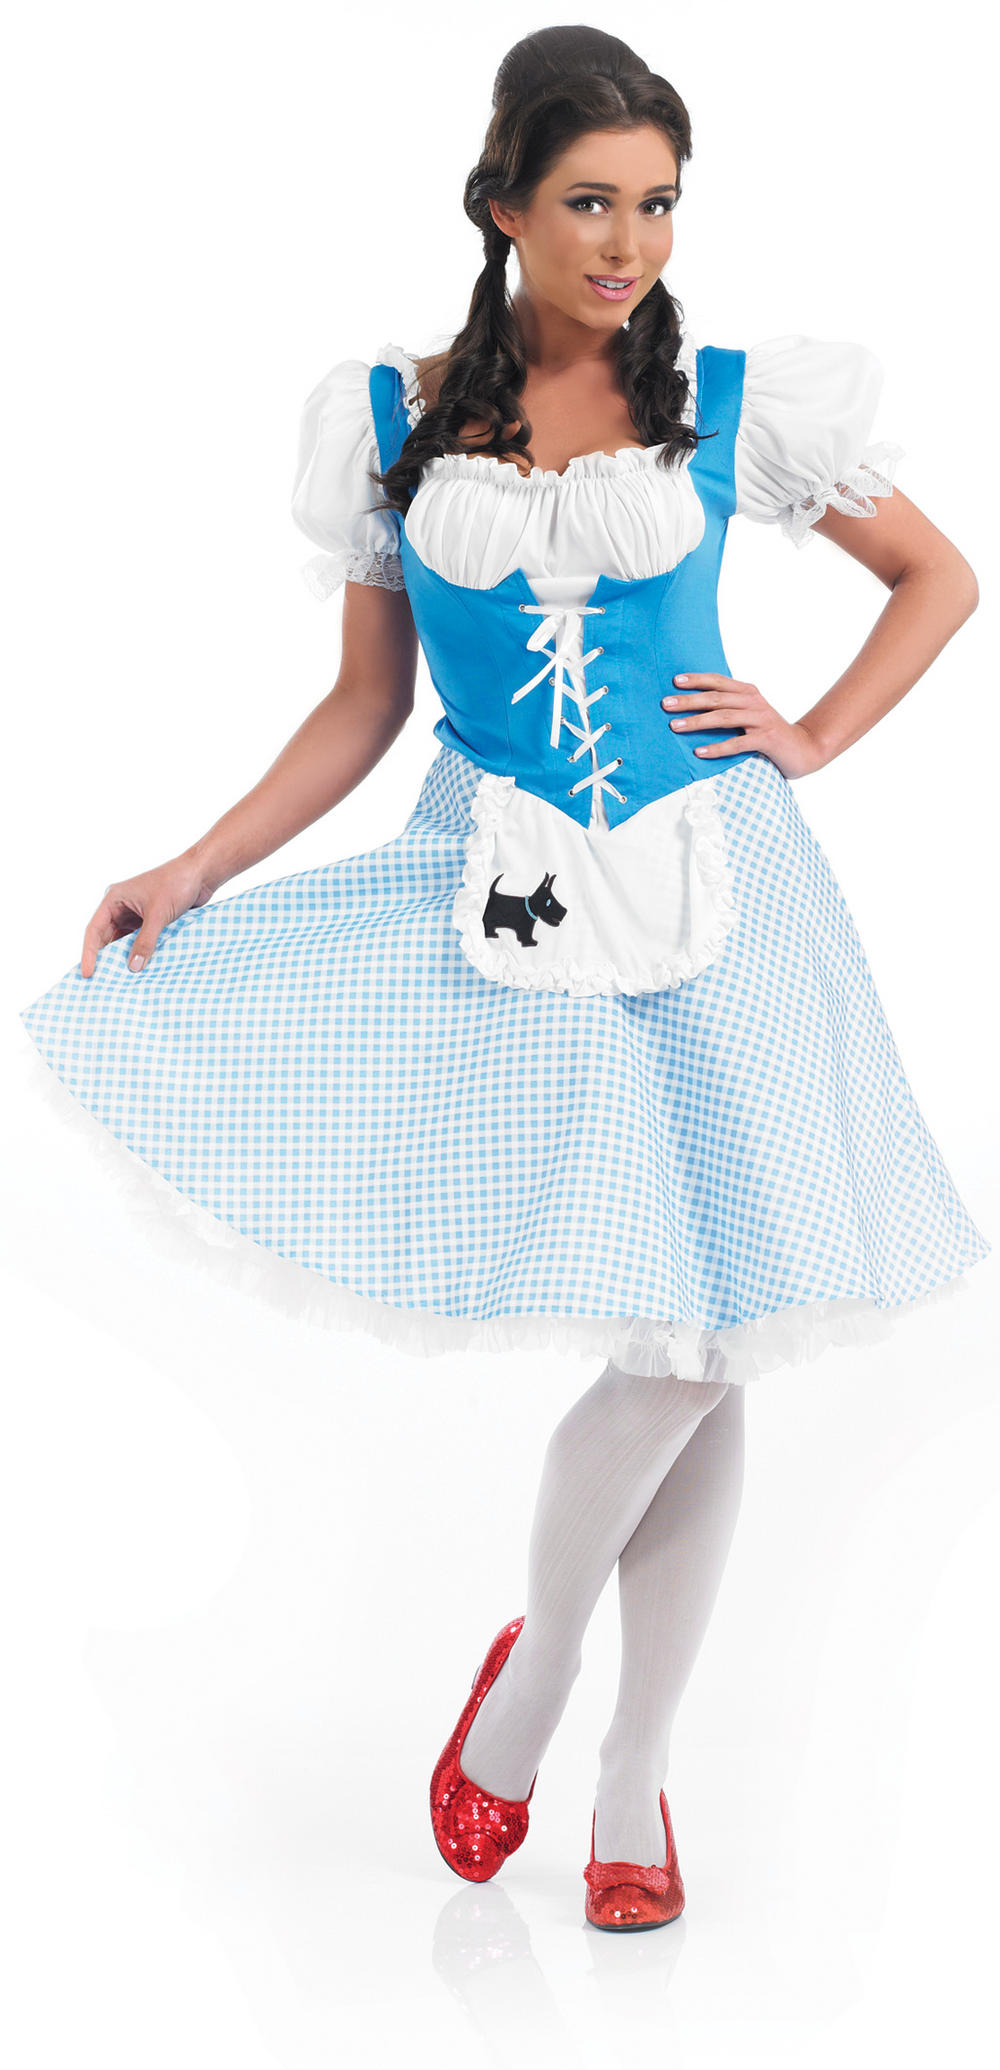 dorothy of Adult oz wizard costume